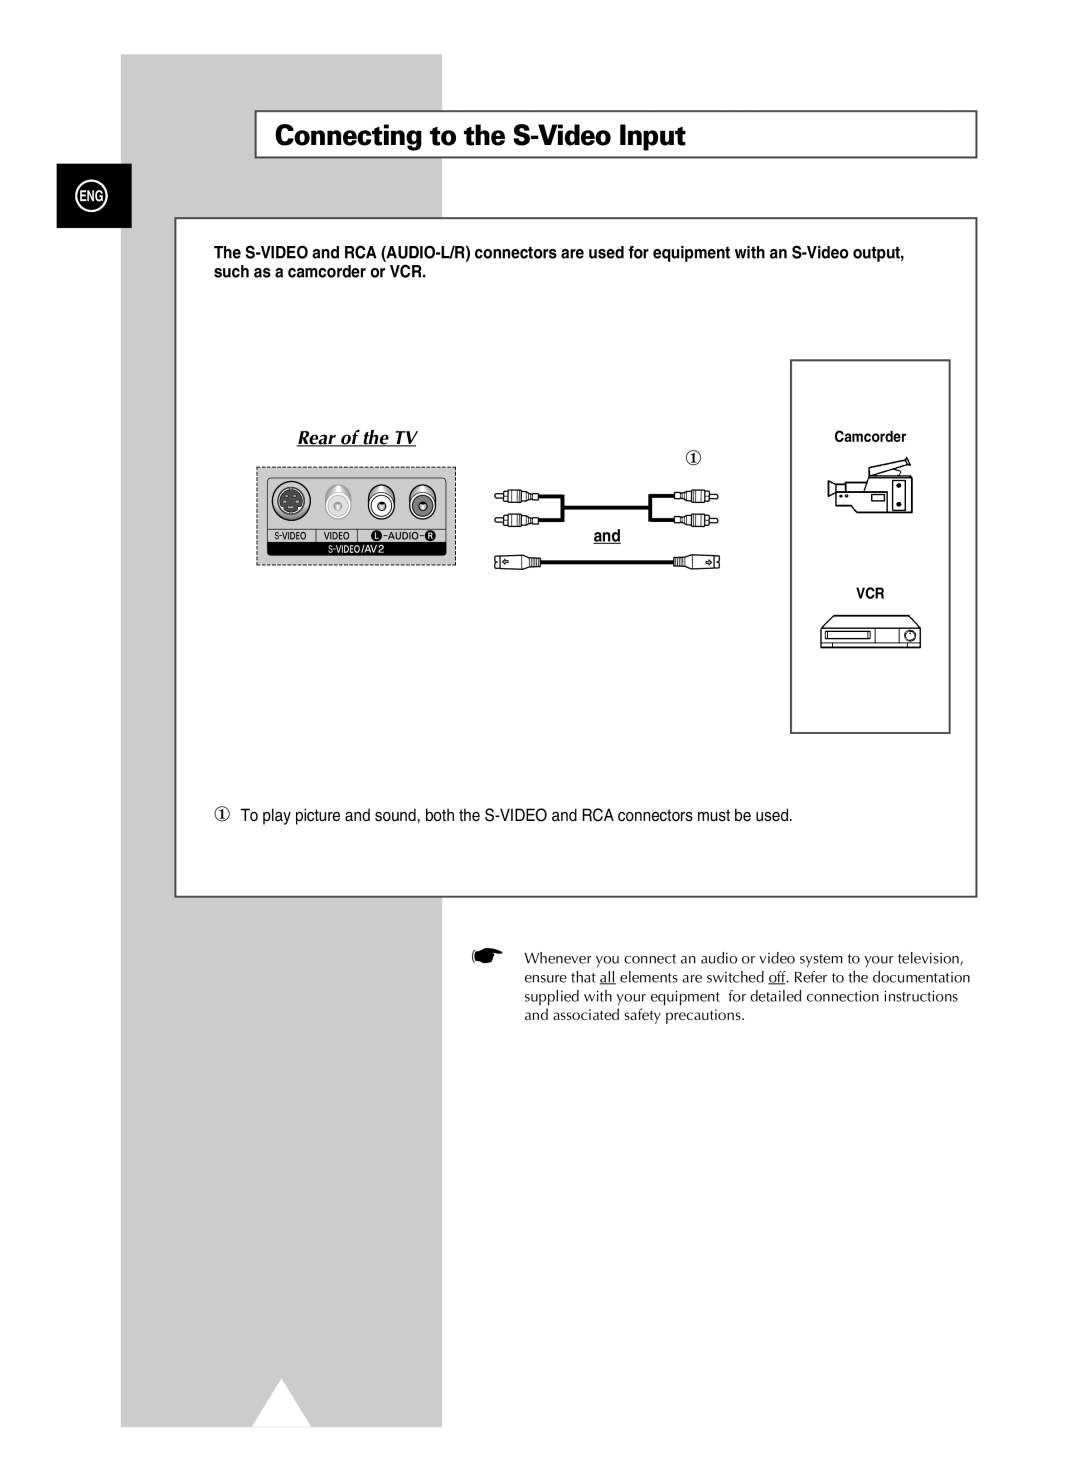 Samsung PS-37S4A1 manual Connecting to the S-Video Input, Rear of the TV, Camcorder 